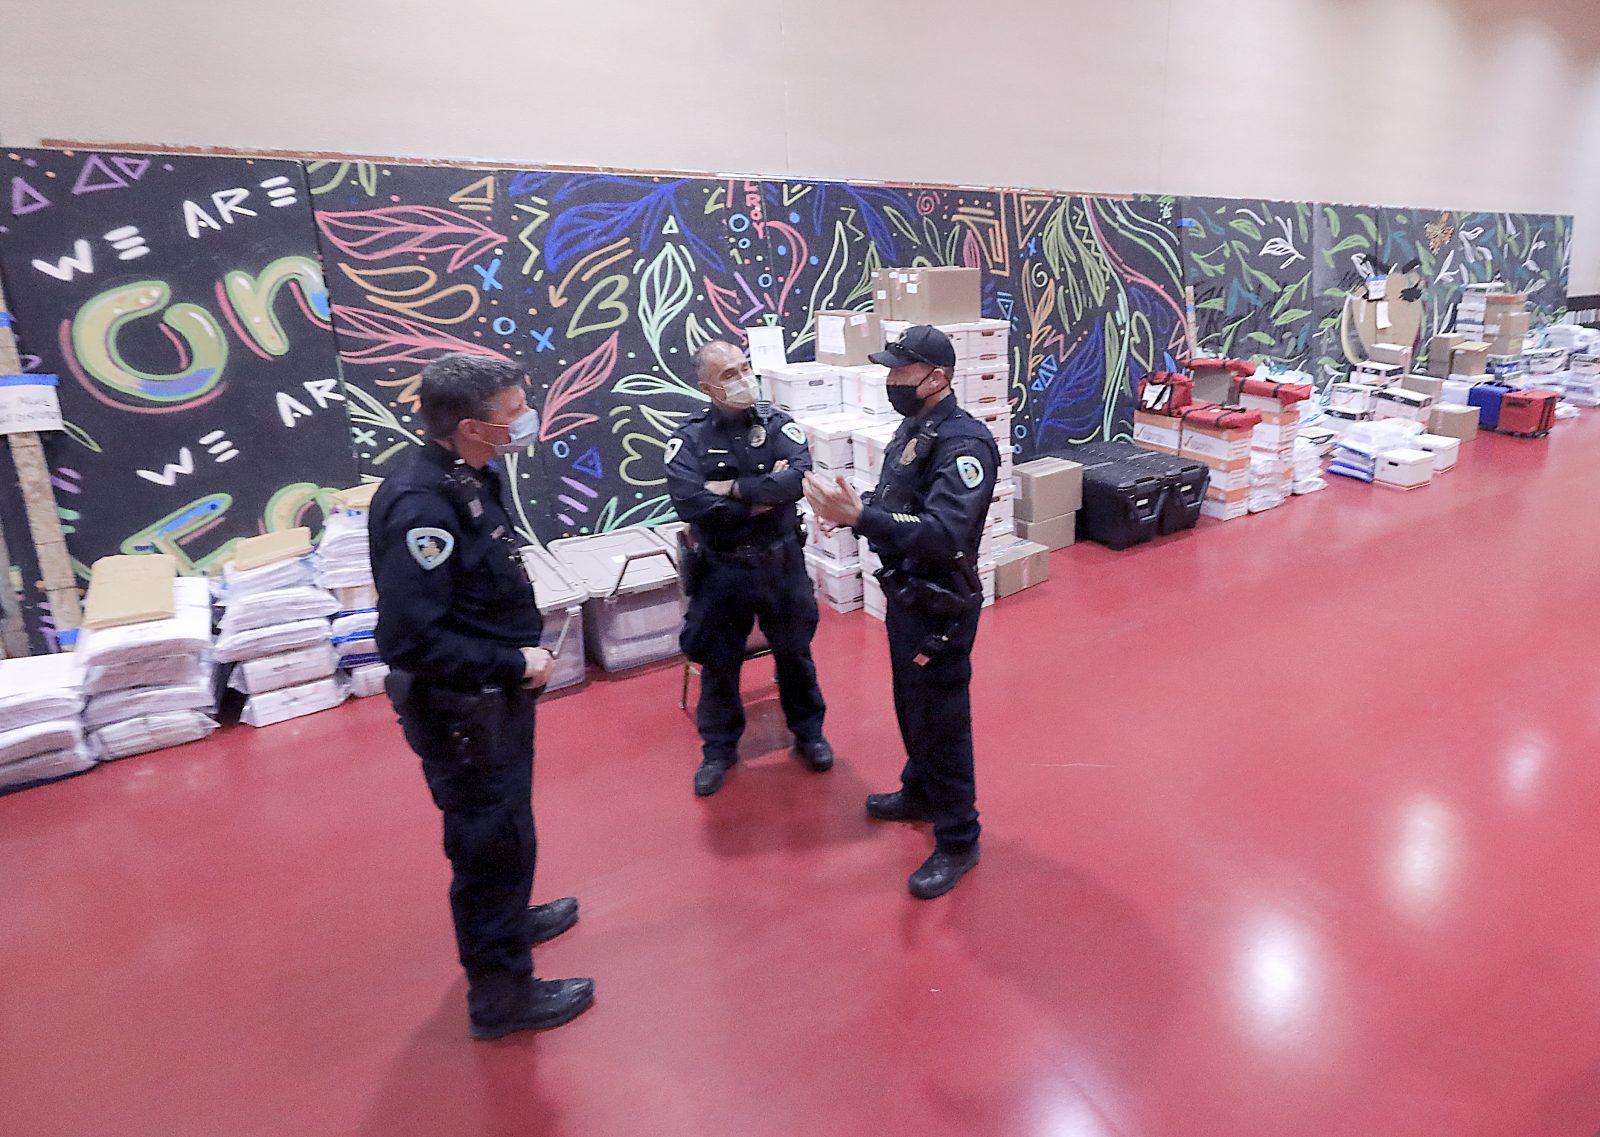 Madison Police Department officers are stationed adjacent to boxes of ballots cast by Dane County, Wis. voters in the 2020 presidential election during a recount of the votes at the Monona Terrace convention center in Madison, Wis. Friday, Nov. 20, 2020. (John Hart/Wisconsin State Journal via AP)